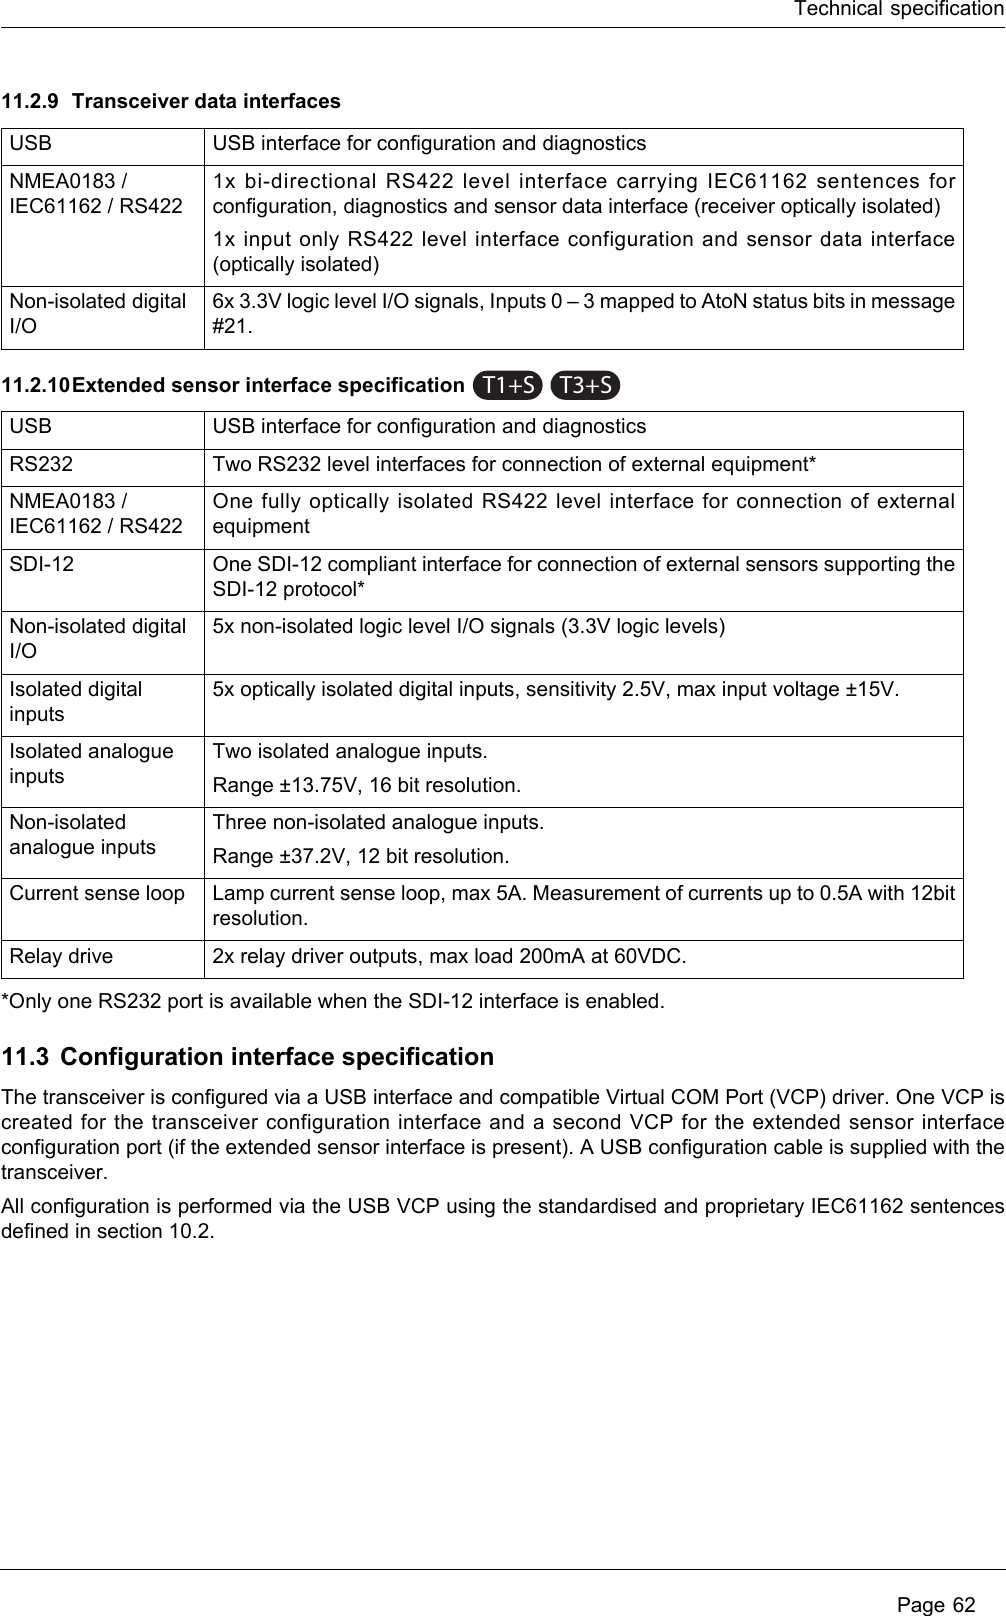 Technical specification Page 6211.2.9 Transceiver data interfaces11.2.10Extended sensor interface specification*Only one RS232 port is available when the SDI-12 interface is enabled.11.3 Configuration interface specificationThe transceiver is configured via a USB interface and compatible Virtual COM Port (VCP) driver. One VCP is created for the transceiver configuration interface and a second VCP for the extended sensor interface configuration port (if the extended sensor interface is present). A USB configuration cable is supplied with the transceiver.All configuration is performed via the USB VCP using the standardised and proprietary IEC61162 sentences defined in section 10.2.USB USB interface for configuration and diagnosticsNMEA0183 / IEC61162 / RS4221x bi-directional RS422 level interface carrying IEC61162 sentences for configuration, diagnostics and sensor data interface (receiver optically isolated)1x input only RS422 level interface configuration and sensor data interface (optically isolated)Non-isolated digital I/O6x 3.3V logic level I/O signals, Inputs 0 – 3 mapped to AtoN status bits in message #21.USB USB interface for configuration and diagnosticsRS232 Two RS232 level interfaces for connection of external equipment*NMEA0183 / IEC61162 / RS422One fully optically isolated RS422 level interface for connection of external equipmentSDI-12 One SDI-12 compliant interface for connection of external sensors supporting the SDI-12 protocol*Non-isolated digital I/O5x non-isolated logic level I/O signals (3.3V logic levels)Isolated digital inputs5x optically isolated digital inputs, sensitivity 2.5V, max input voltage ±15V.Isolated analogue inputsTwo isolated analogue inputs.Range ±13.75V, 16 bit resolution.Non-isolated analogue inputsThree non-isolated analogue inputs.Range ±37.2V, 12 bit resolution.Current sense loop Lamp current sense loop, max 5A. Measurement of currents up to 0.5A with 12bit resolution.Relay drive 2x relay driver outputs, max load 200mA at 60VDC.T1+ST3+S